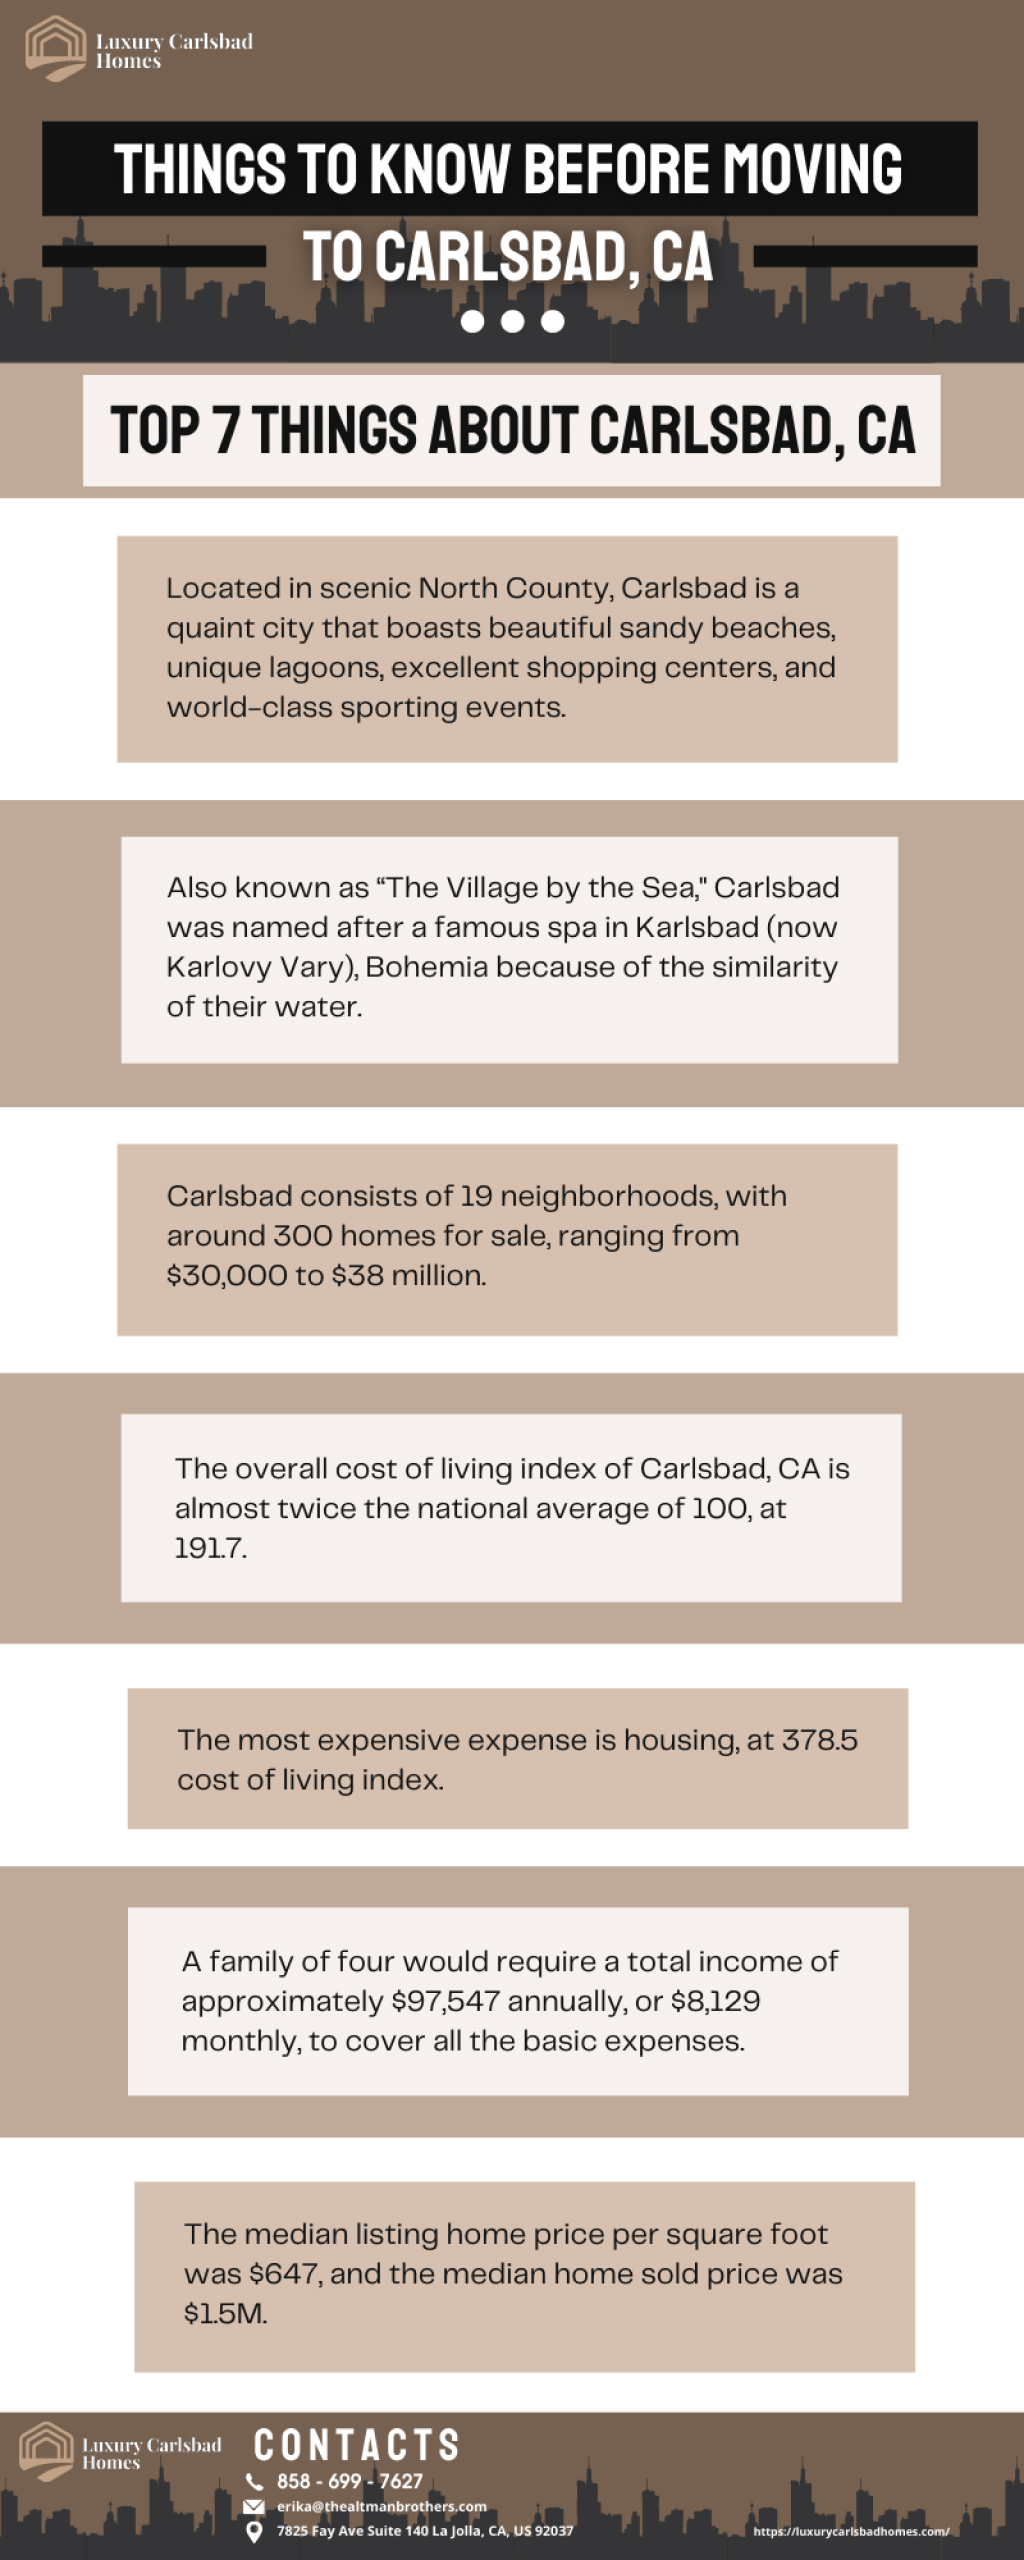 Things to Know Before Moving to Carlsbad, CA